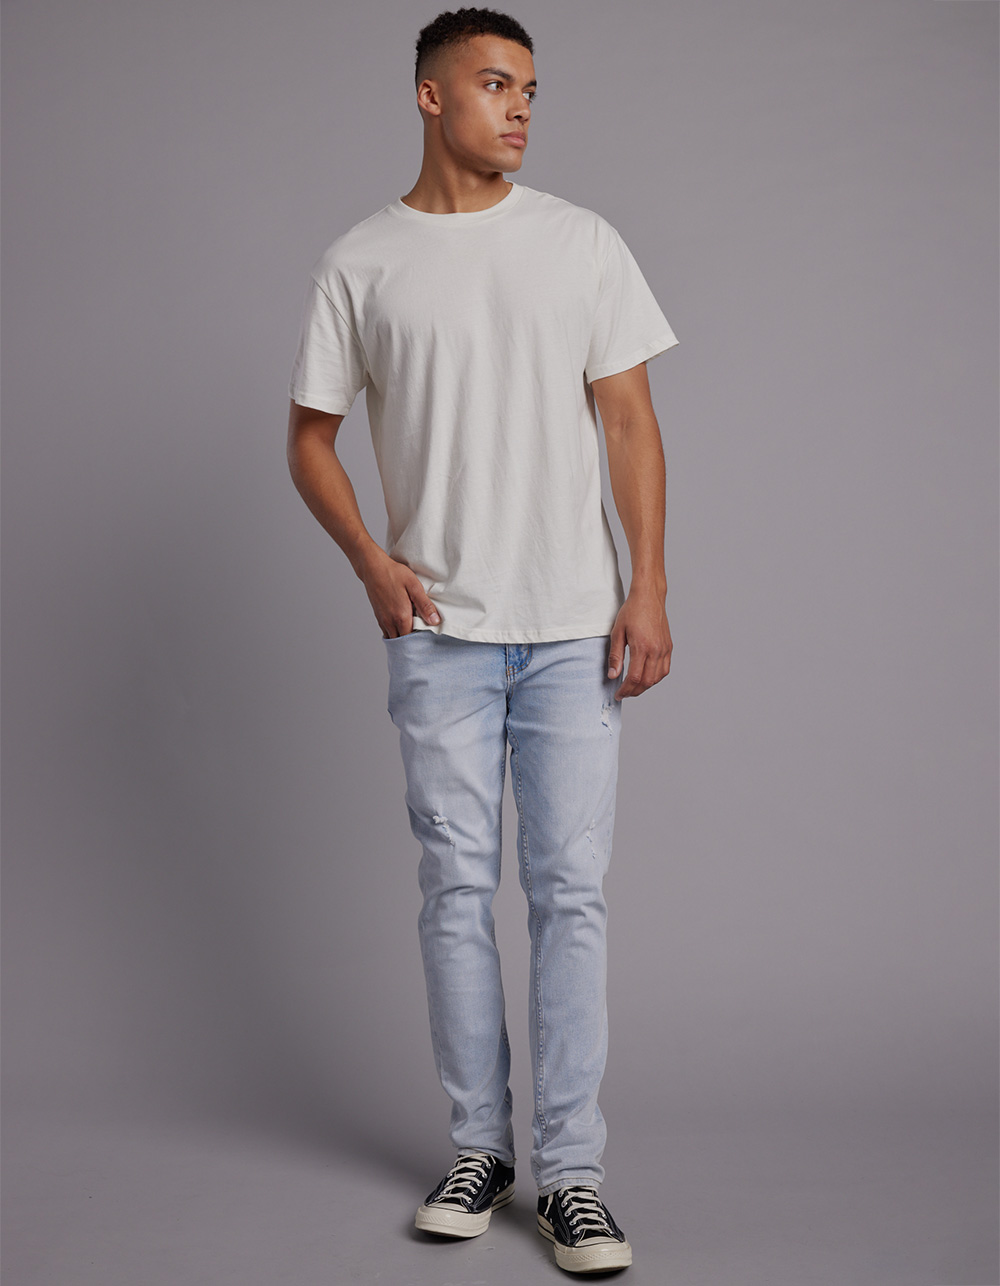 Men's RSQ Clothing - at $17.49+